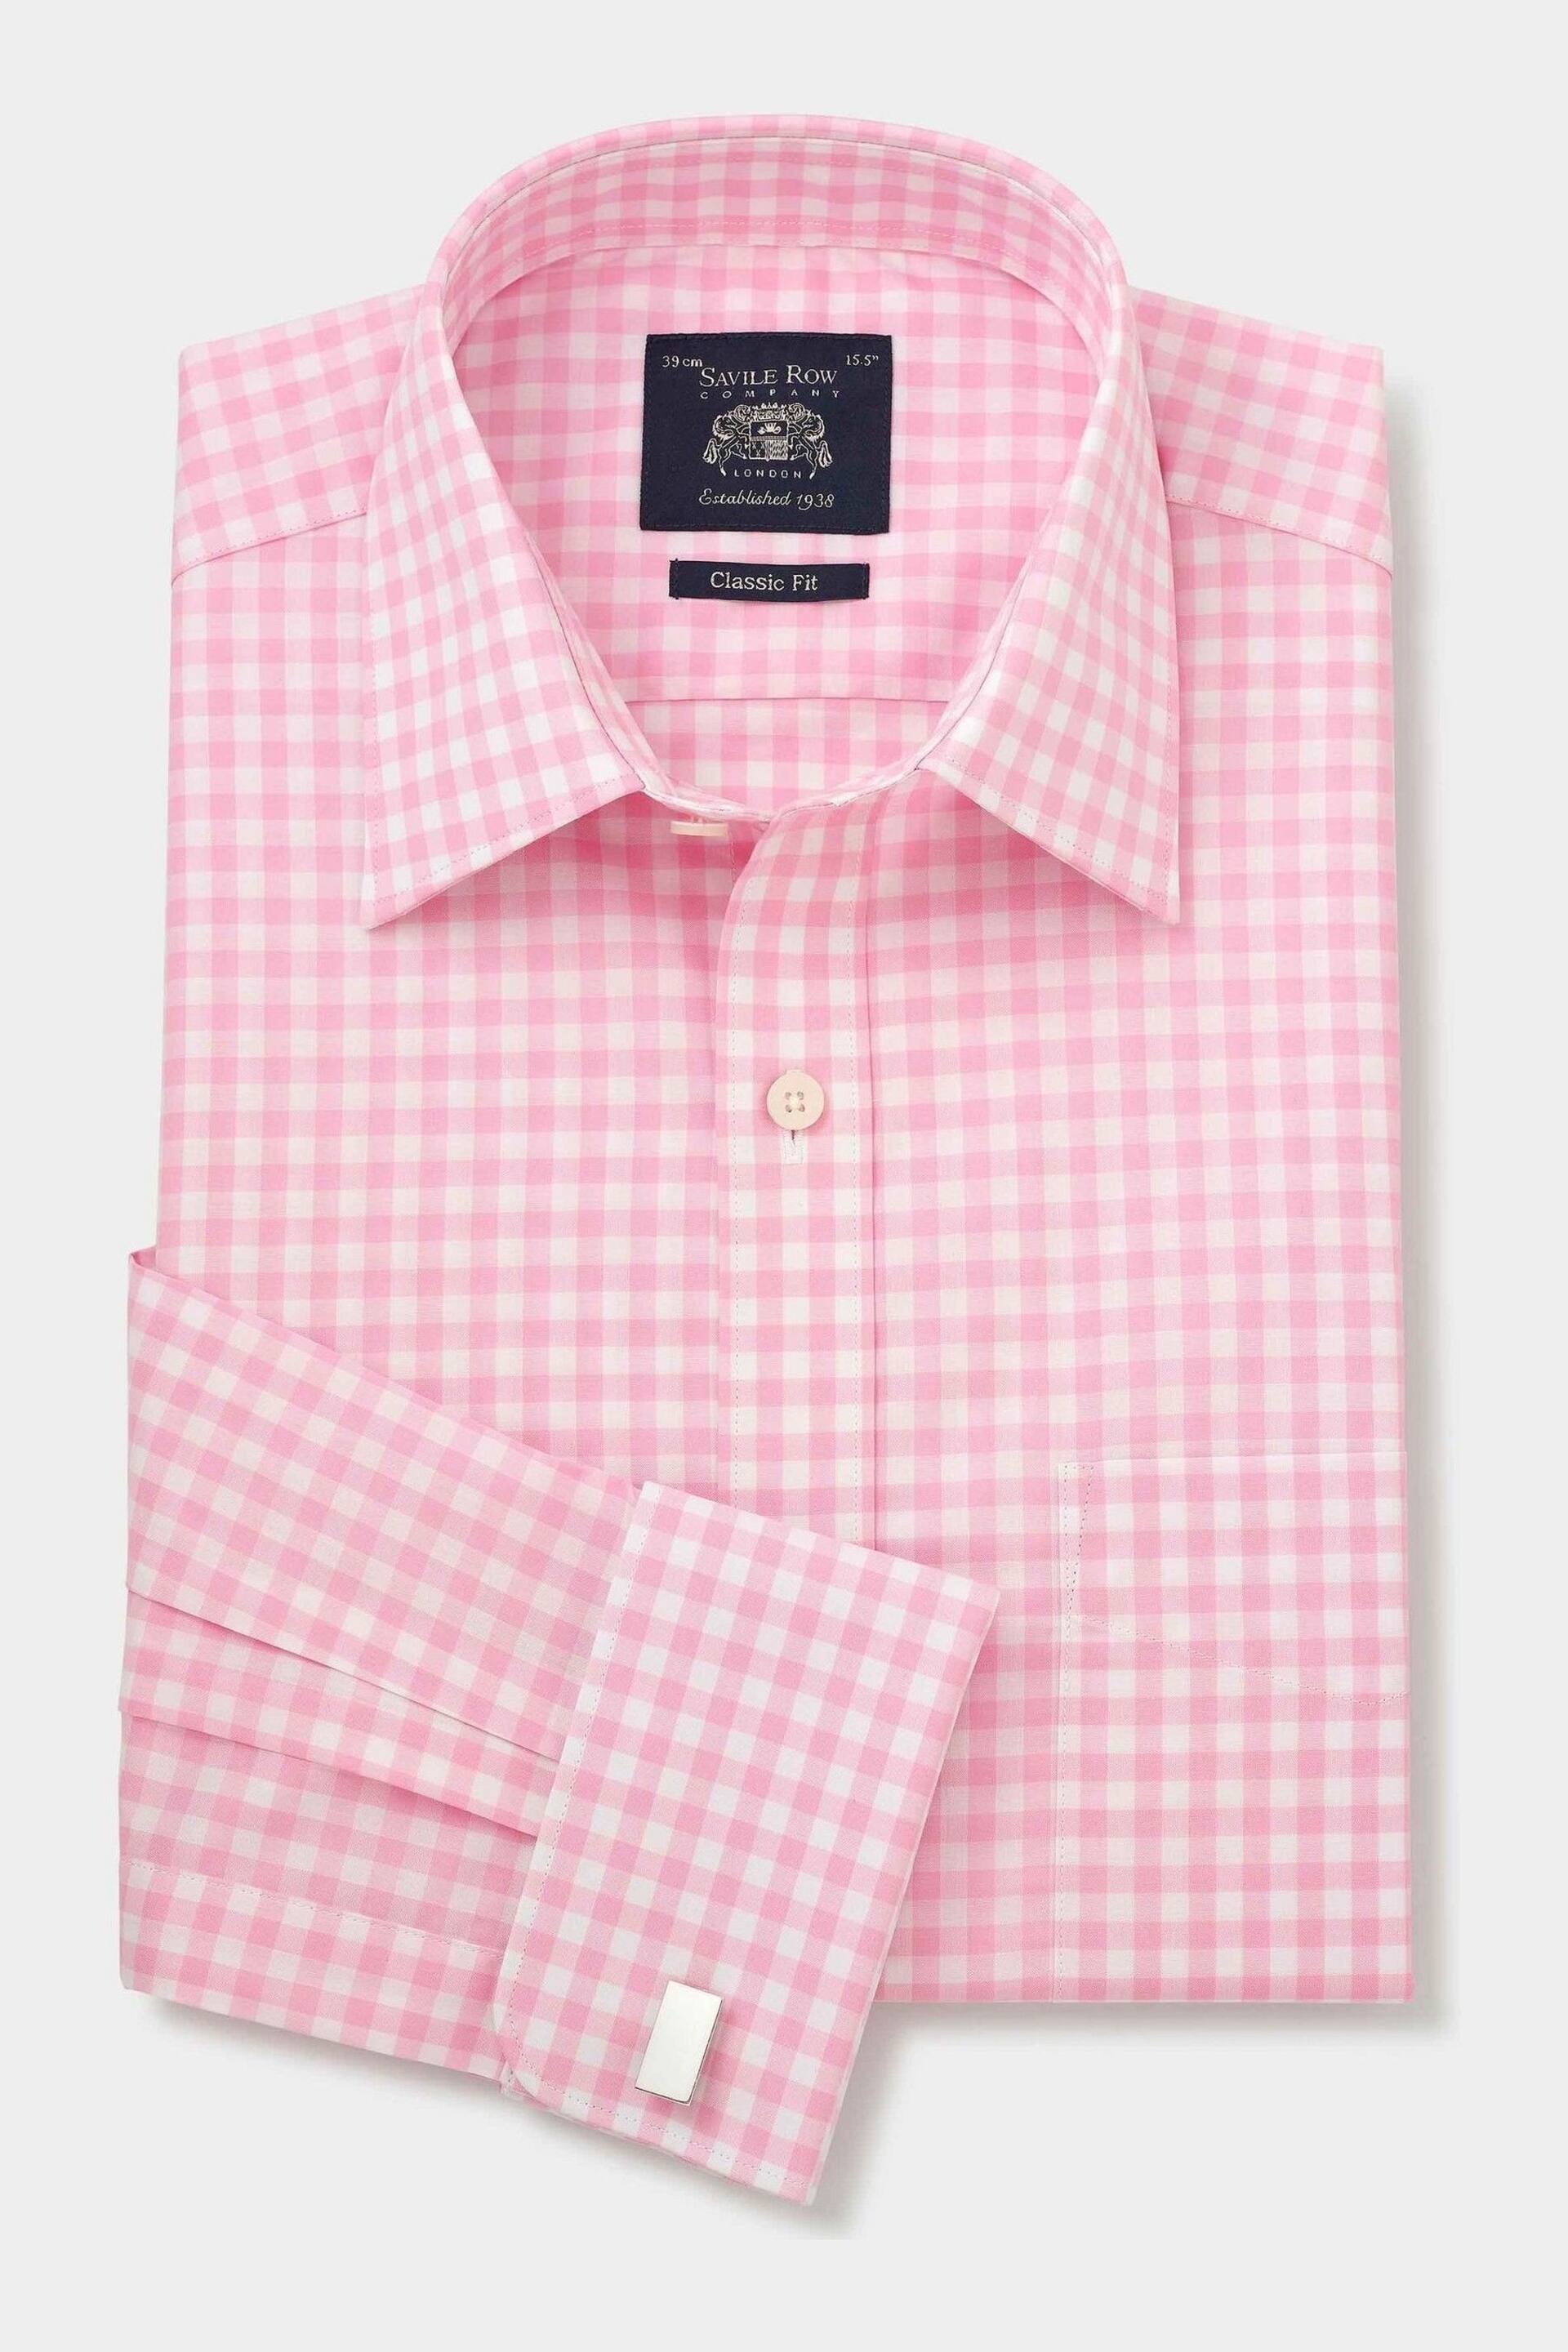 The Savile Row Company Classic Fit Pink Savile Row Check Double Cuff Shirt - Image 4 of 4